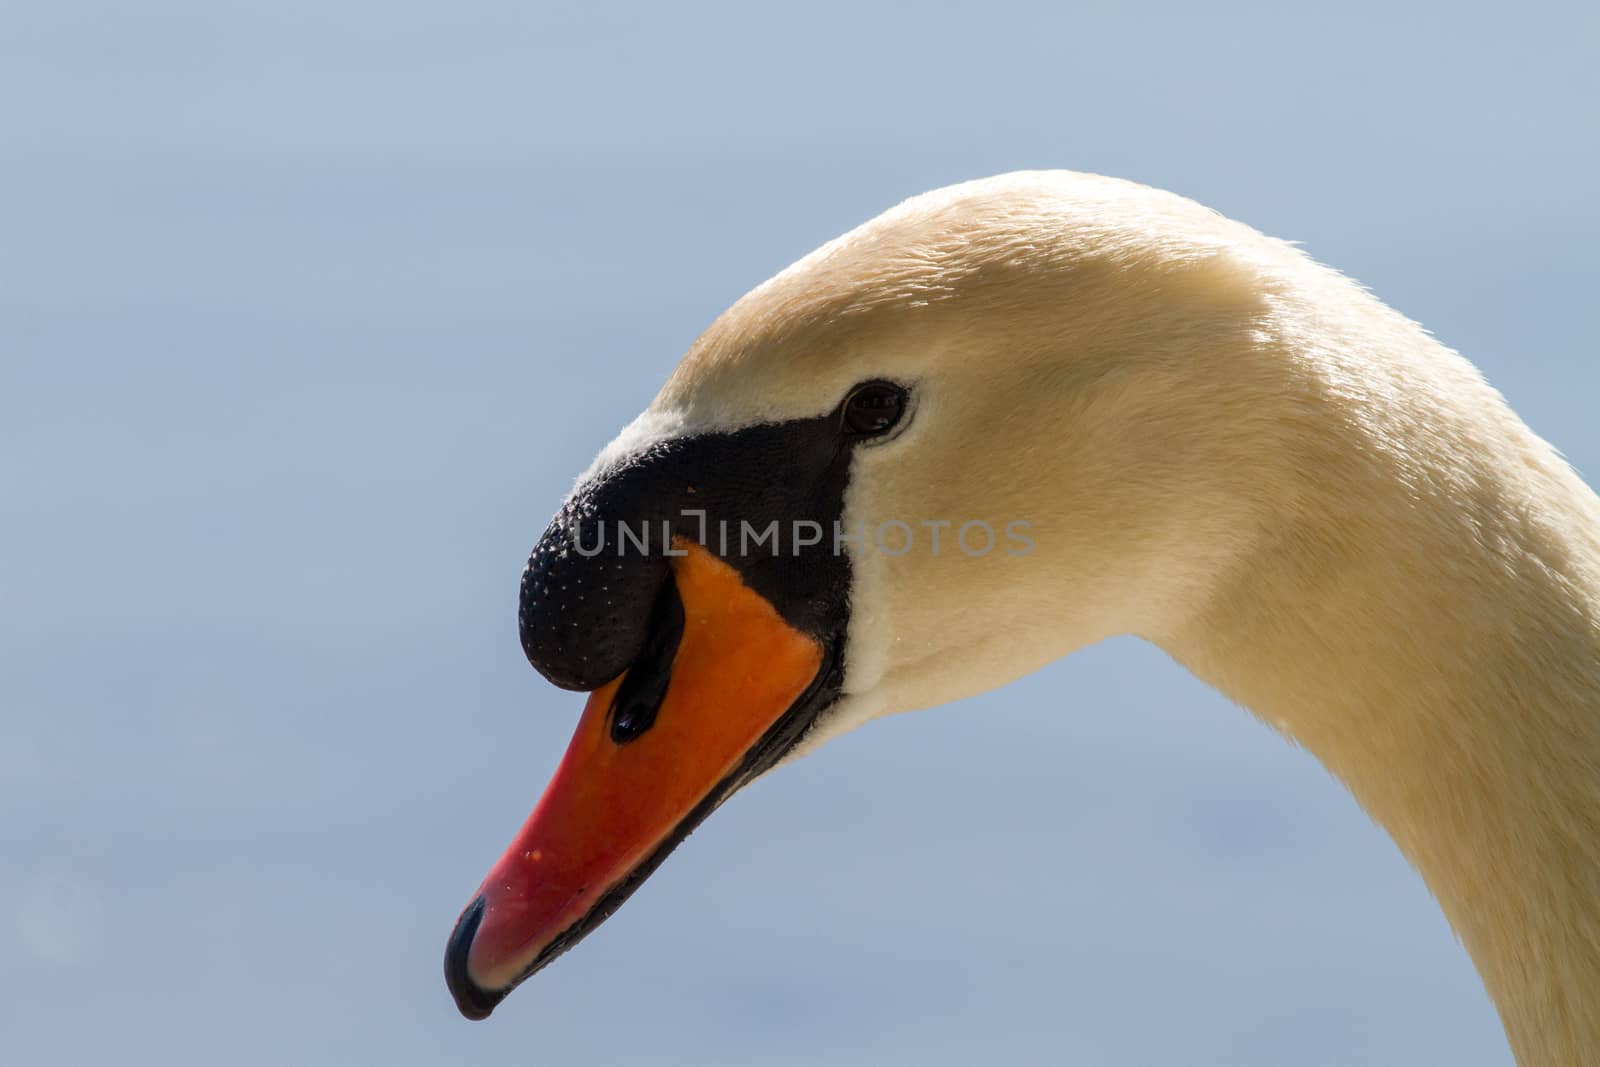 A Swan photographed in Sesto Calende on the Maggiore lake in Italy.